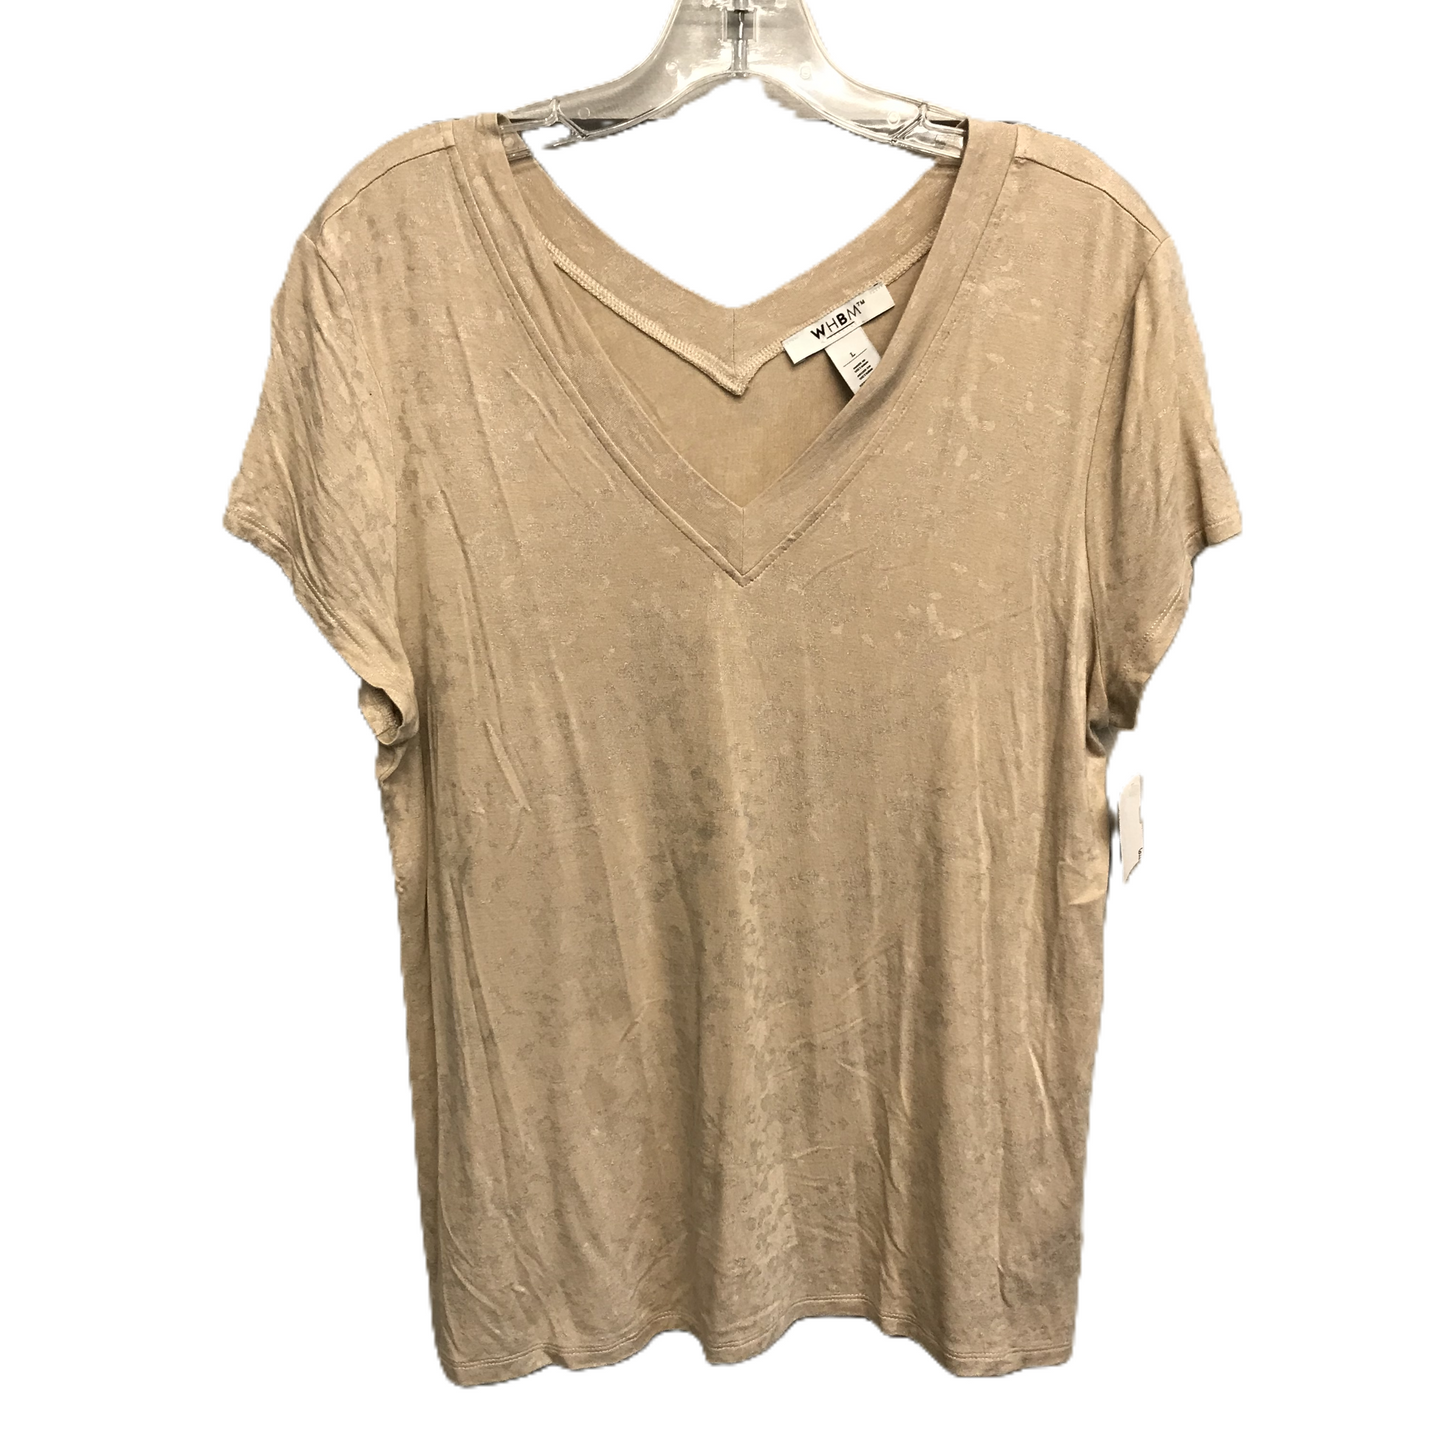 Tan Top Short Sleeve By White House Black Market, Size: L